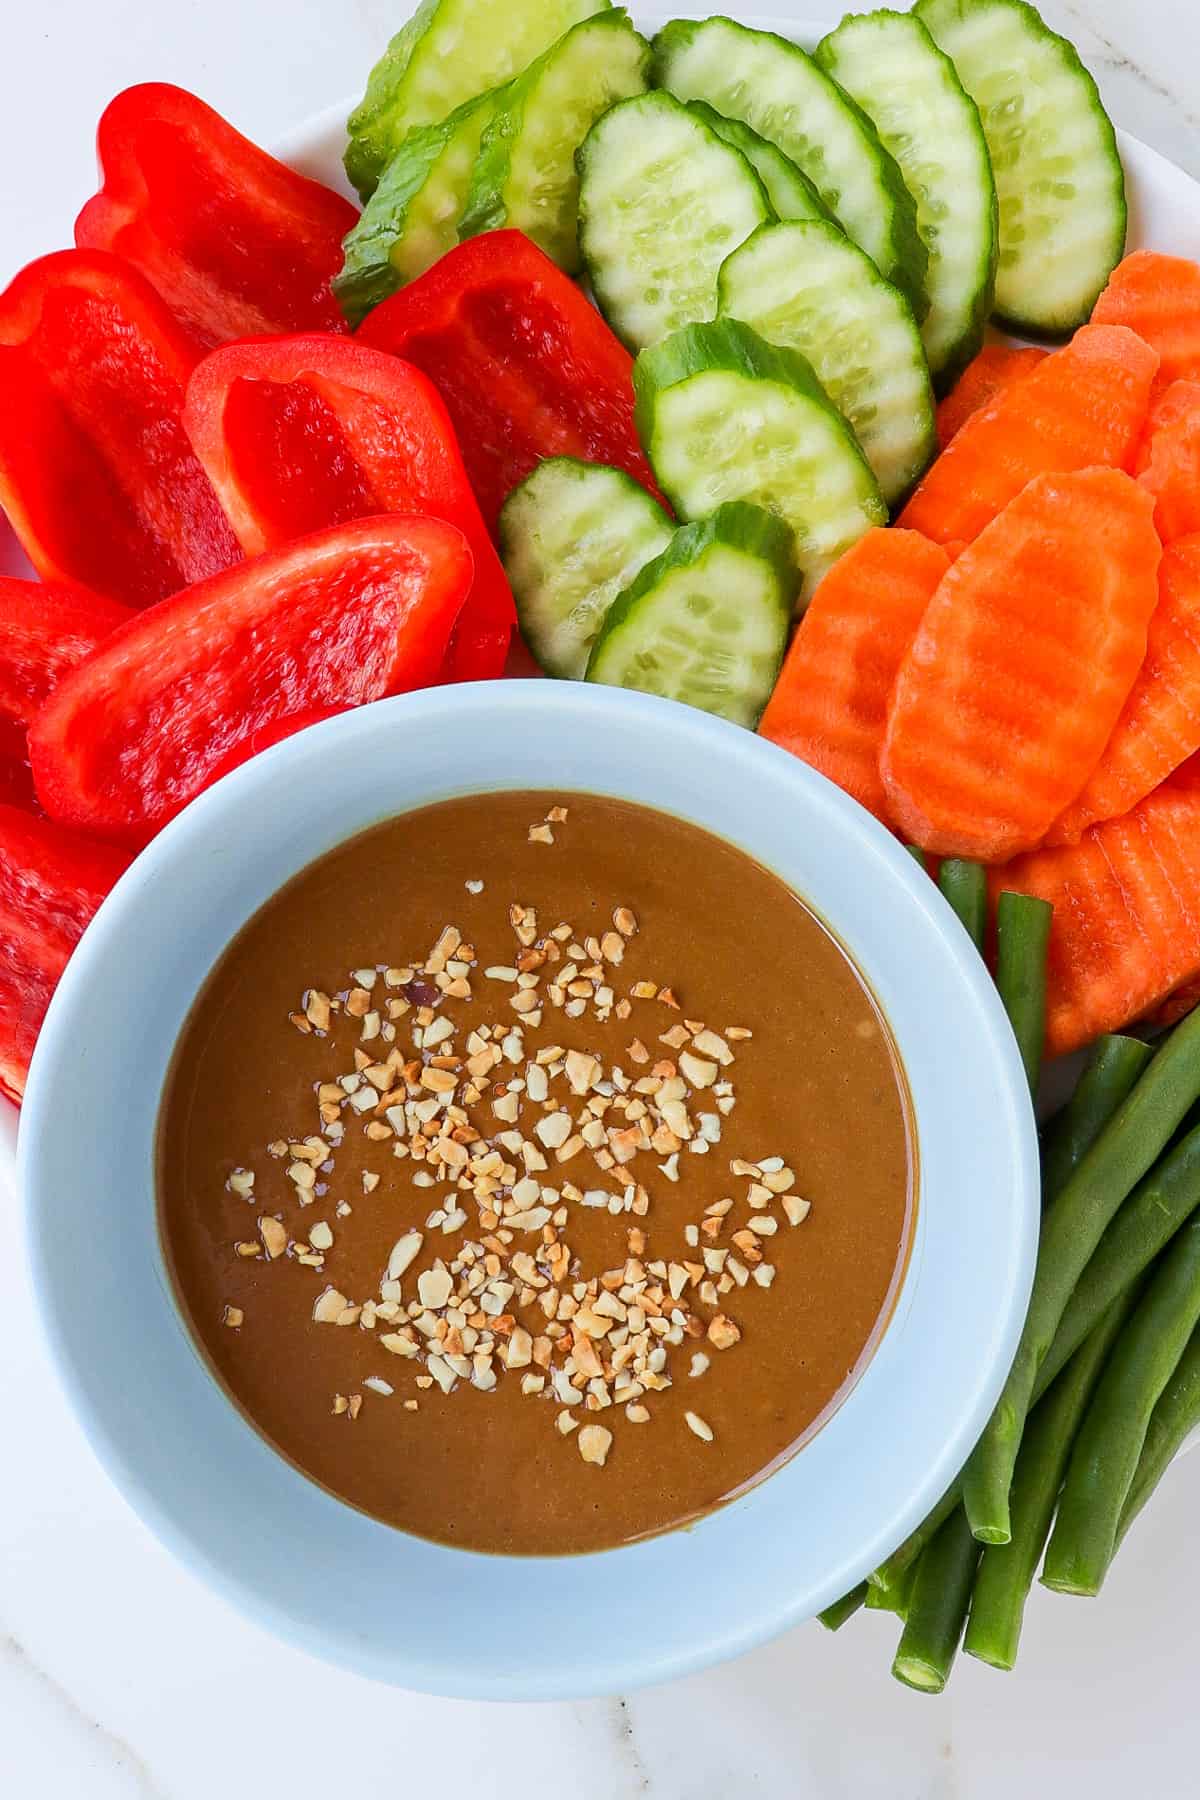 Hoisin peanut sauce in a bowl with sliced veggies on the plate.